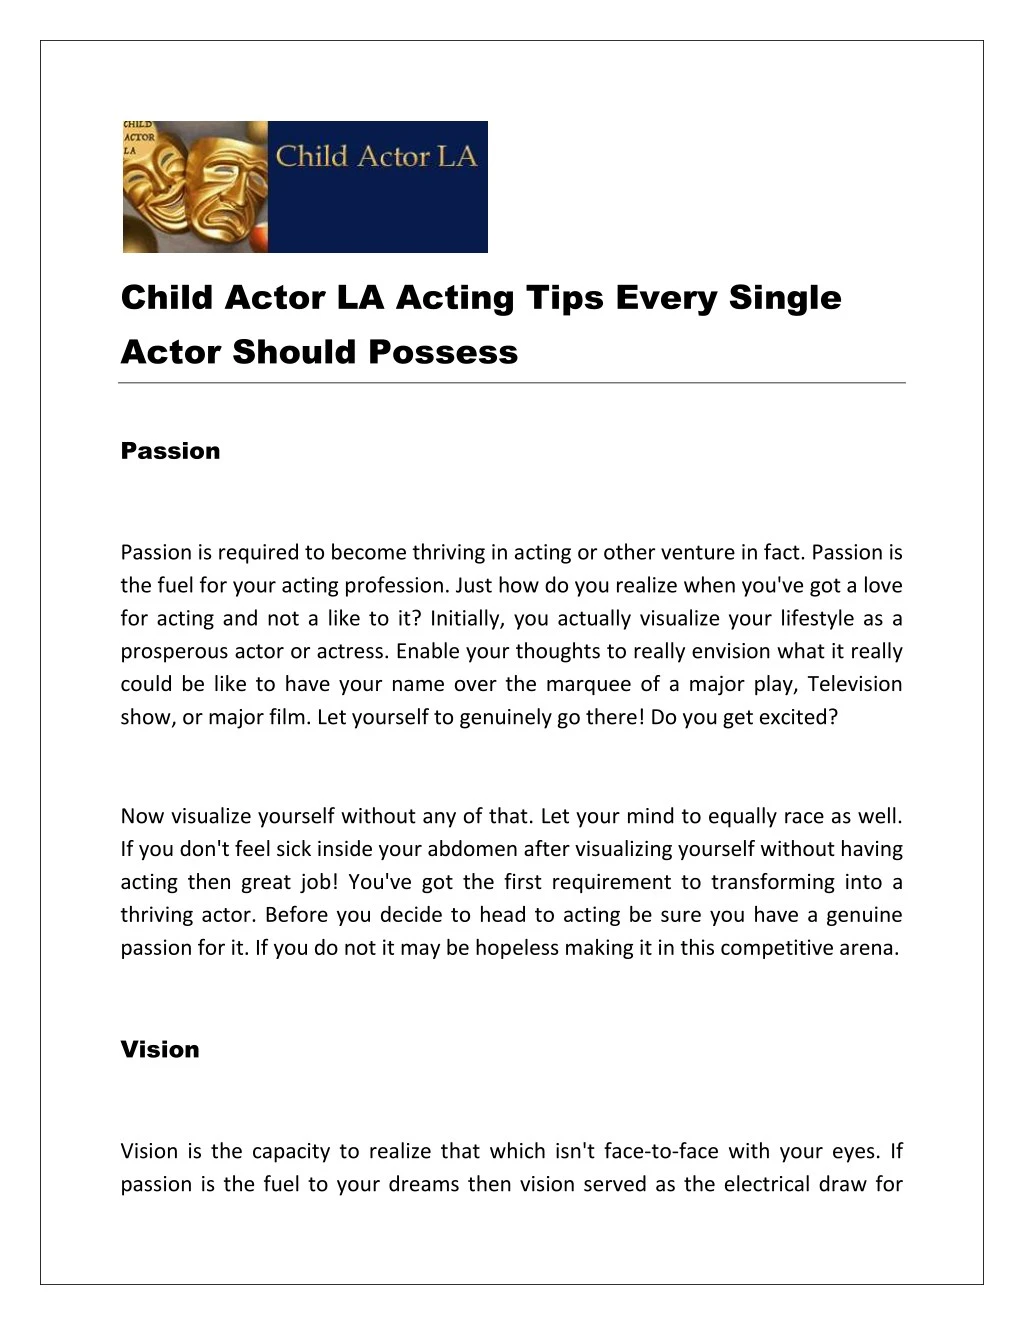 child actor la acting tips every single actor